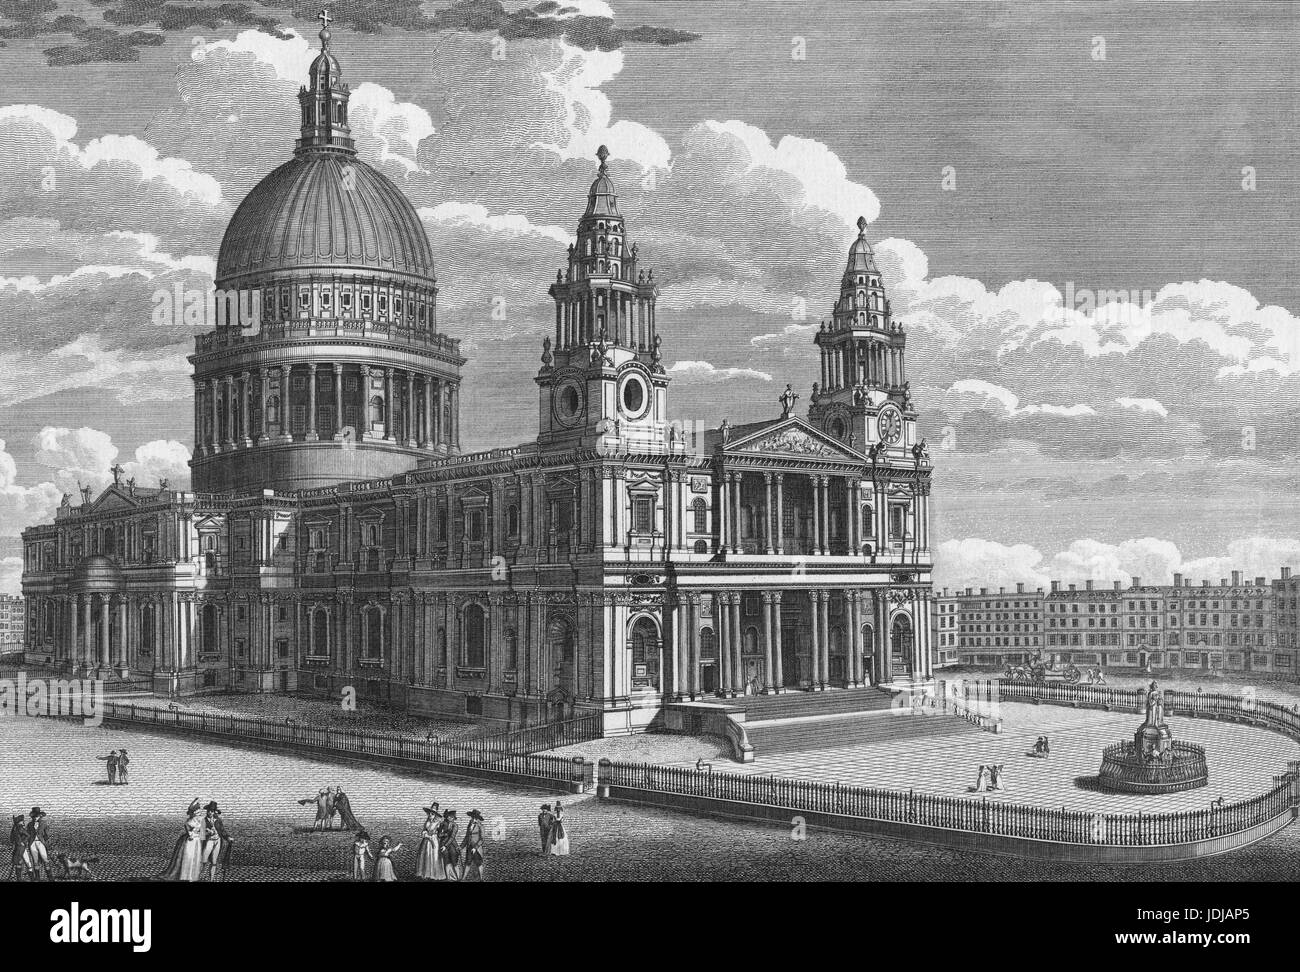 Engraving of the exterior of St. Paul's Cathedral in the City of London, United Kingdom, 1770. From the New York Public Library. Stock Photo